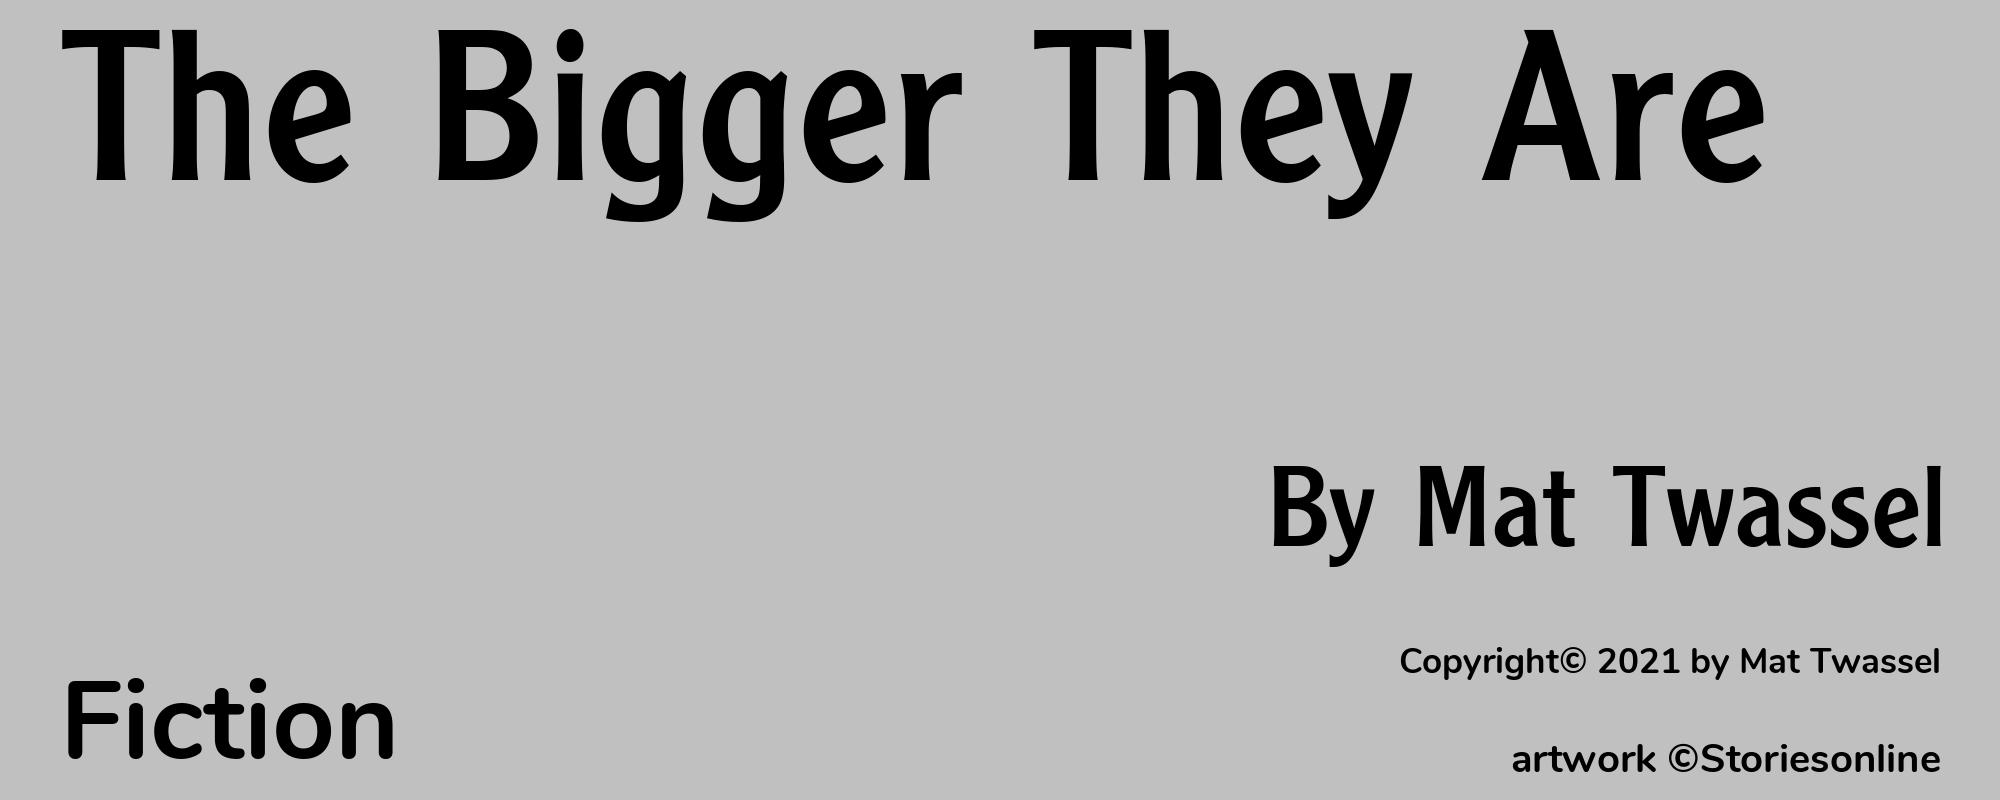 The Bigger They Are - Cover